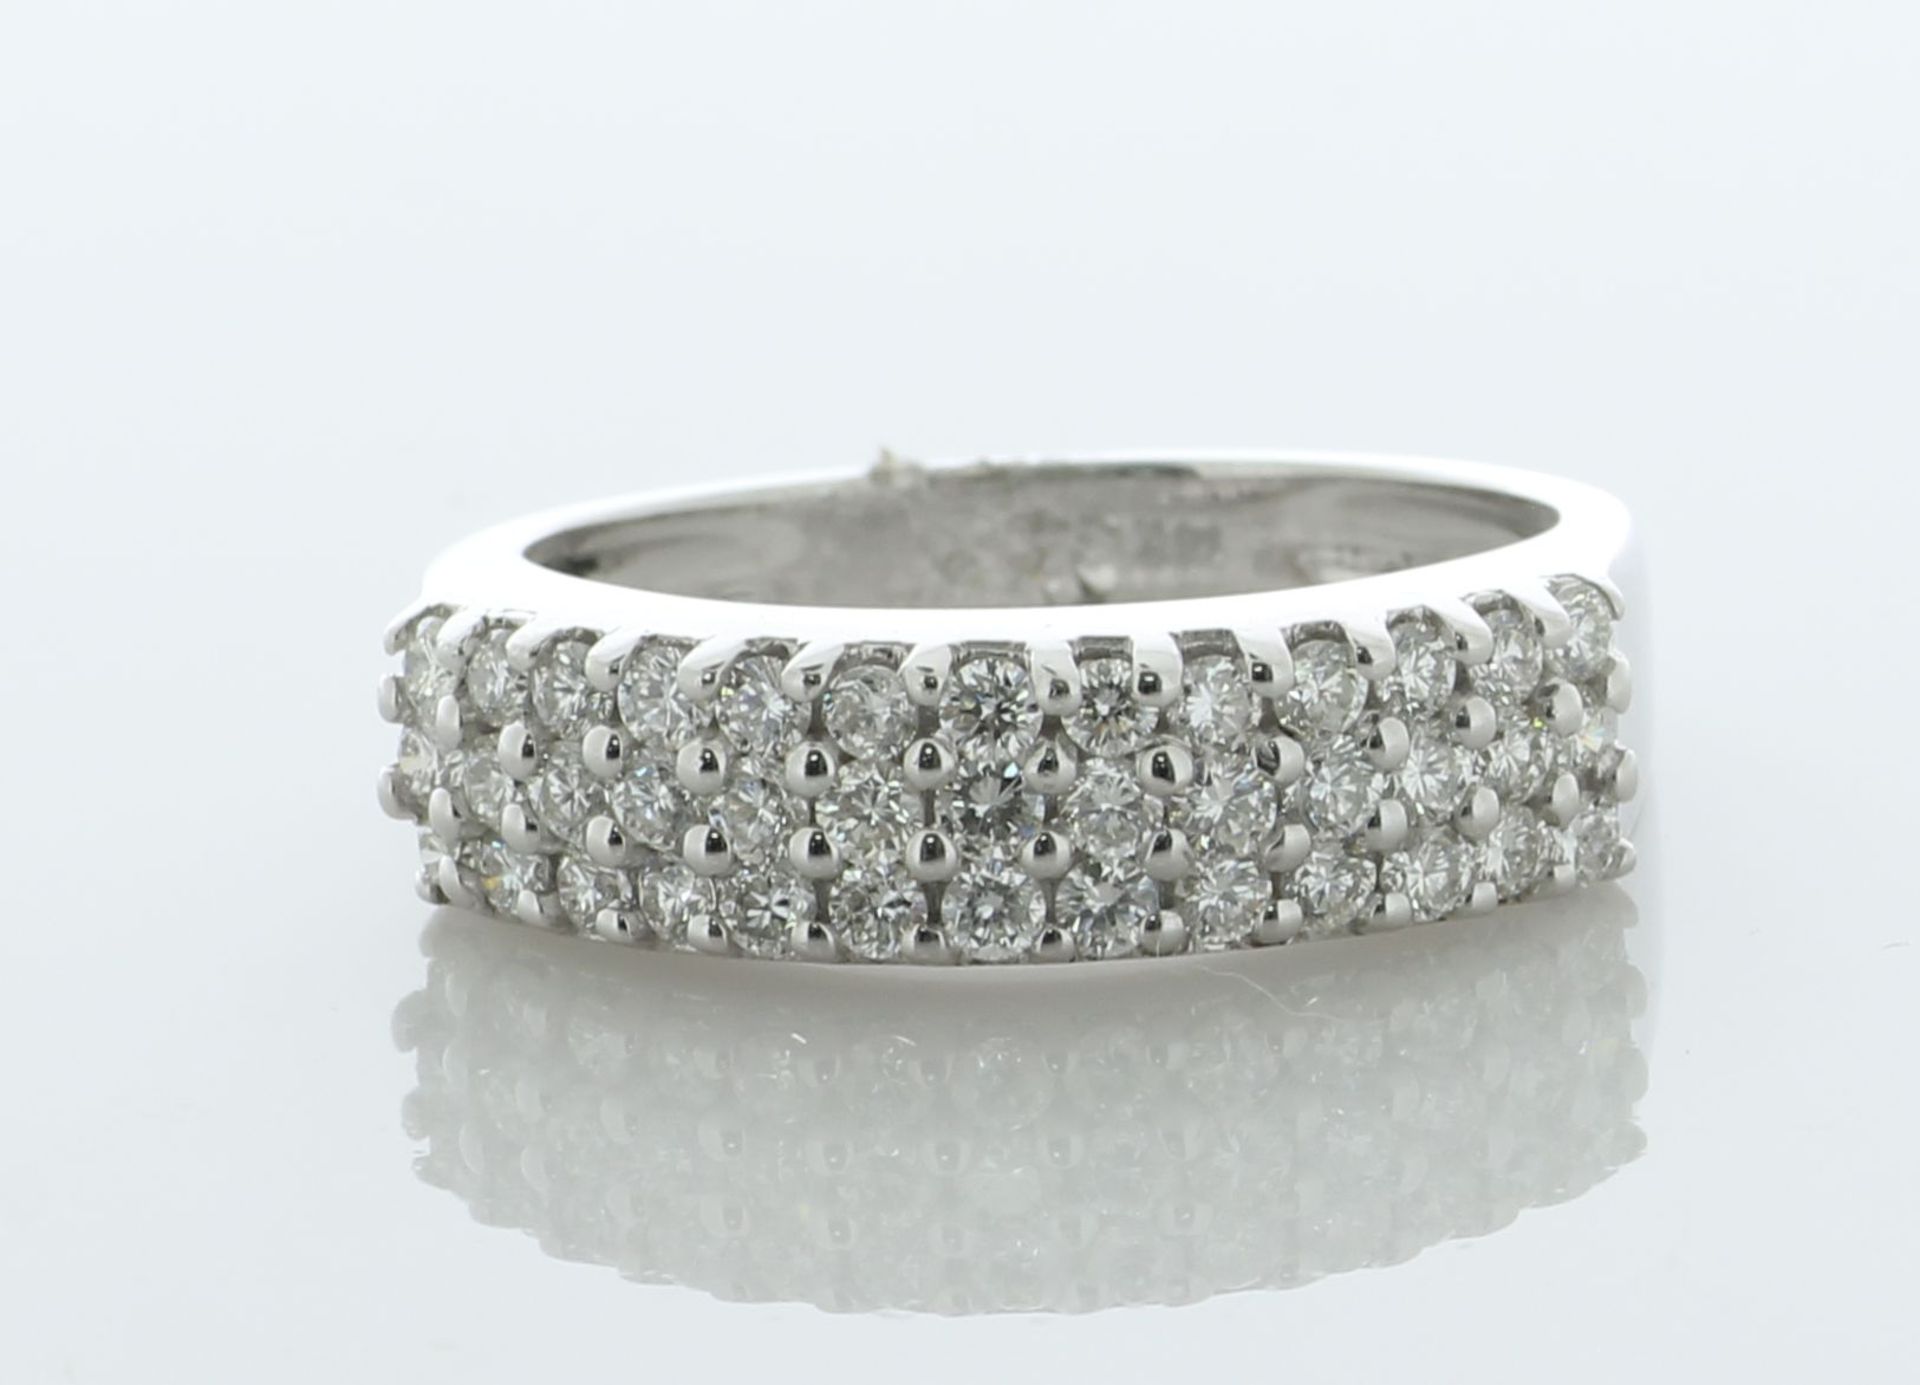 14ct White Gold Semi Eternity Diamond Ring 1.50 Carats - Valued By AGI £4,500.00 - This gorgeous